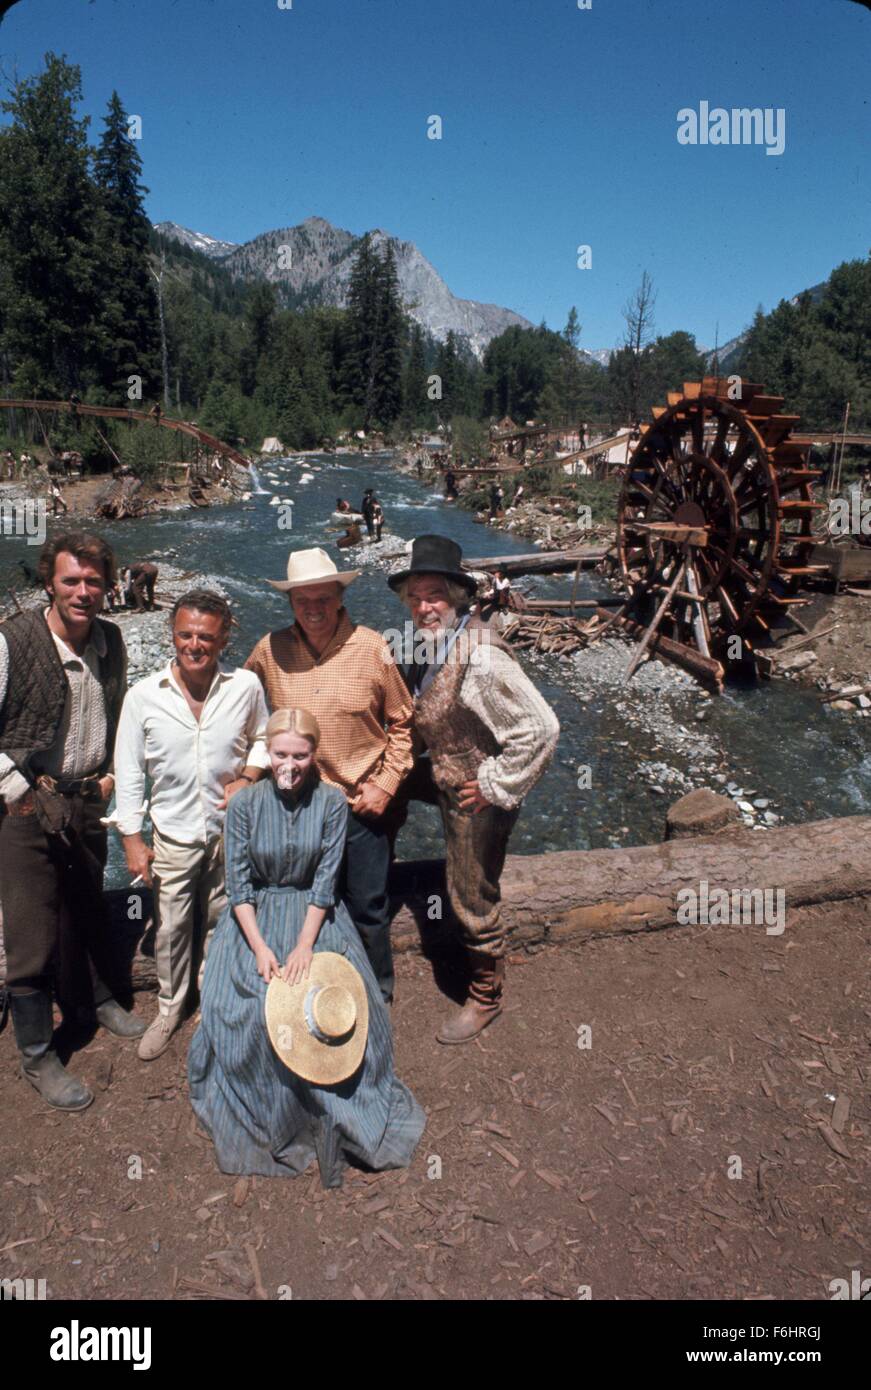 1969, Film Title: PAINT YOUR WAGON, Director: JOSHUA LOGAN, Studio: PARAMOUNT, Pictured: CLINT EASTWOOD, GROUP, ALAN JAY LERNER, JOSHUA LOGAN, LEE MARVIN, MOVIE EXTRAS, MOVIE SET. (Credit Image: SNAP) Stock Photo